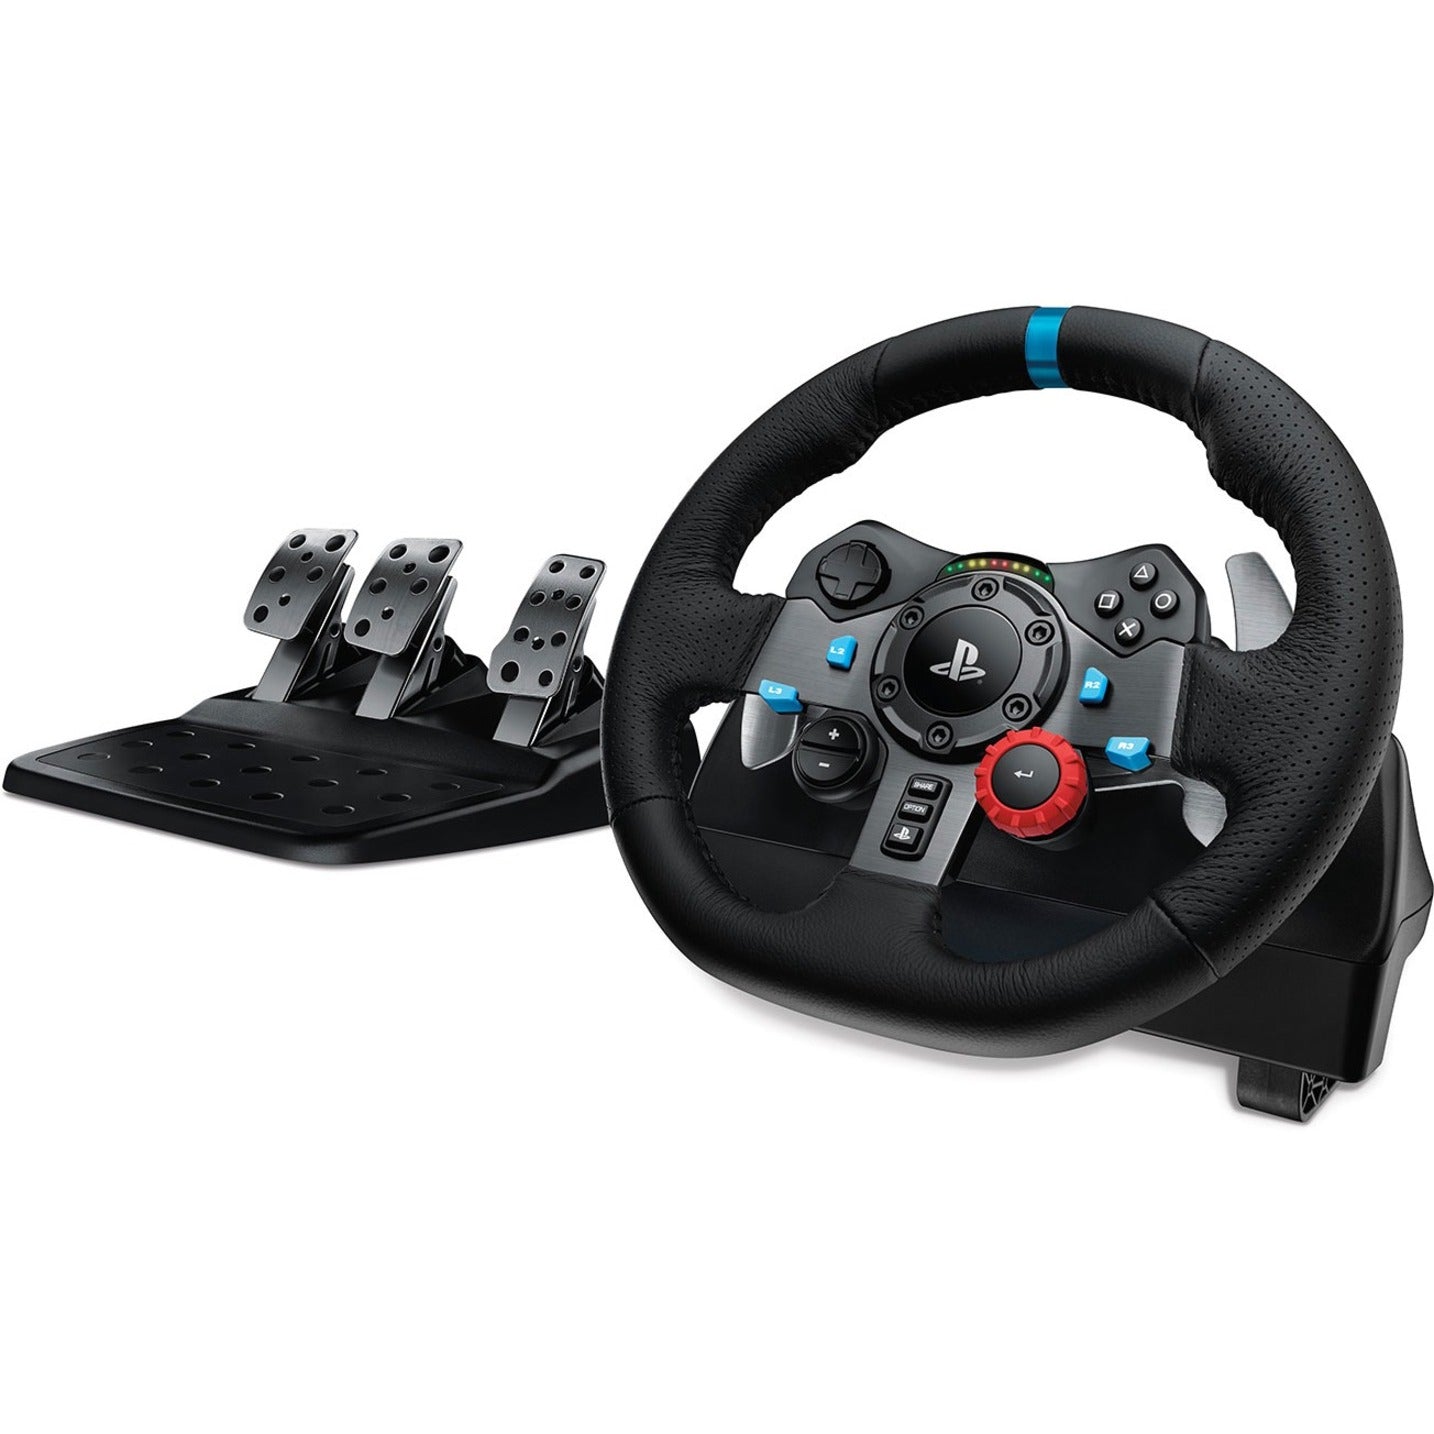 Logitech 941-000110 G29 Racing Wheel for PlayStation and PC, LED Indicator, Force Feedback